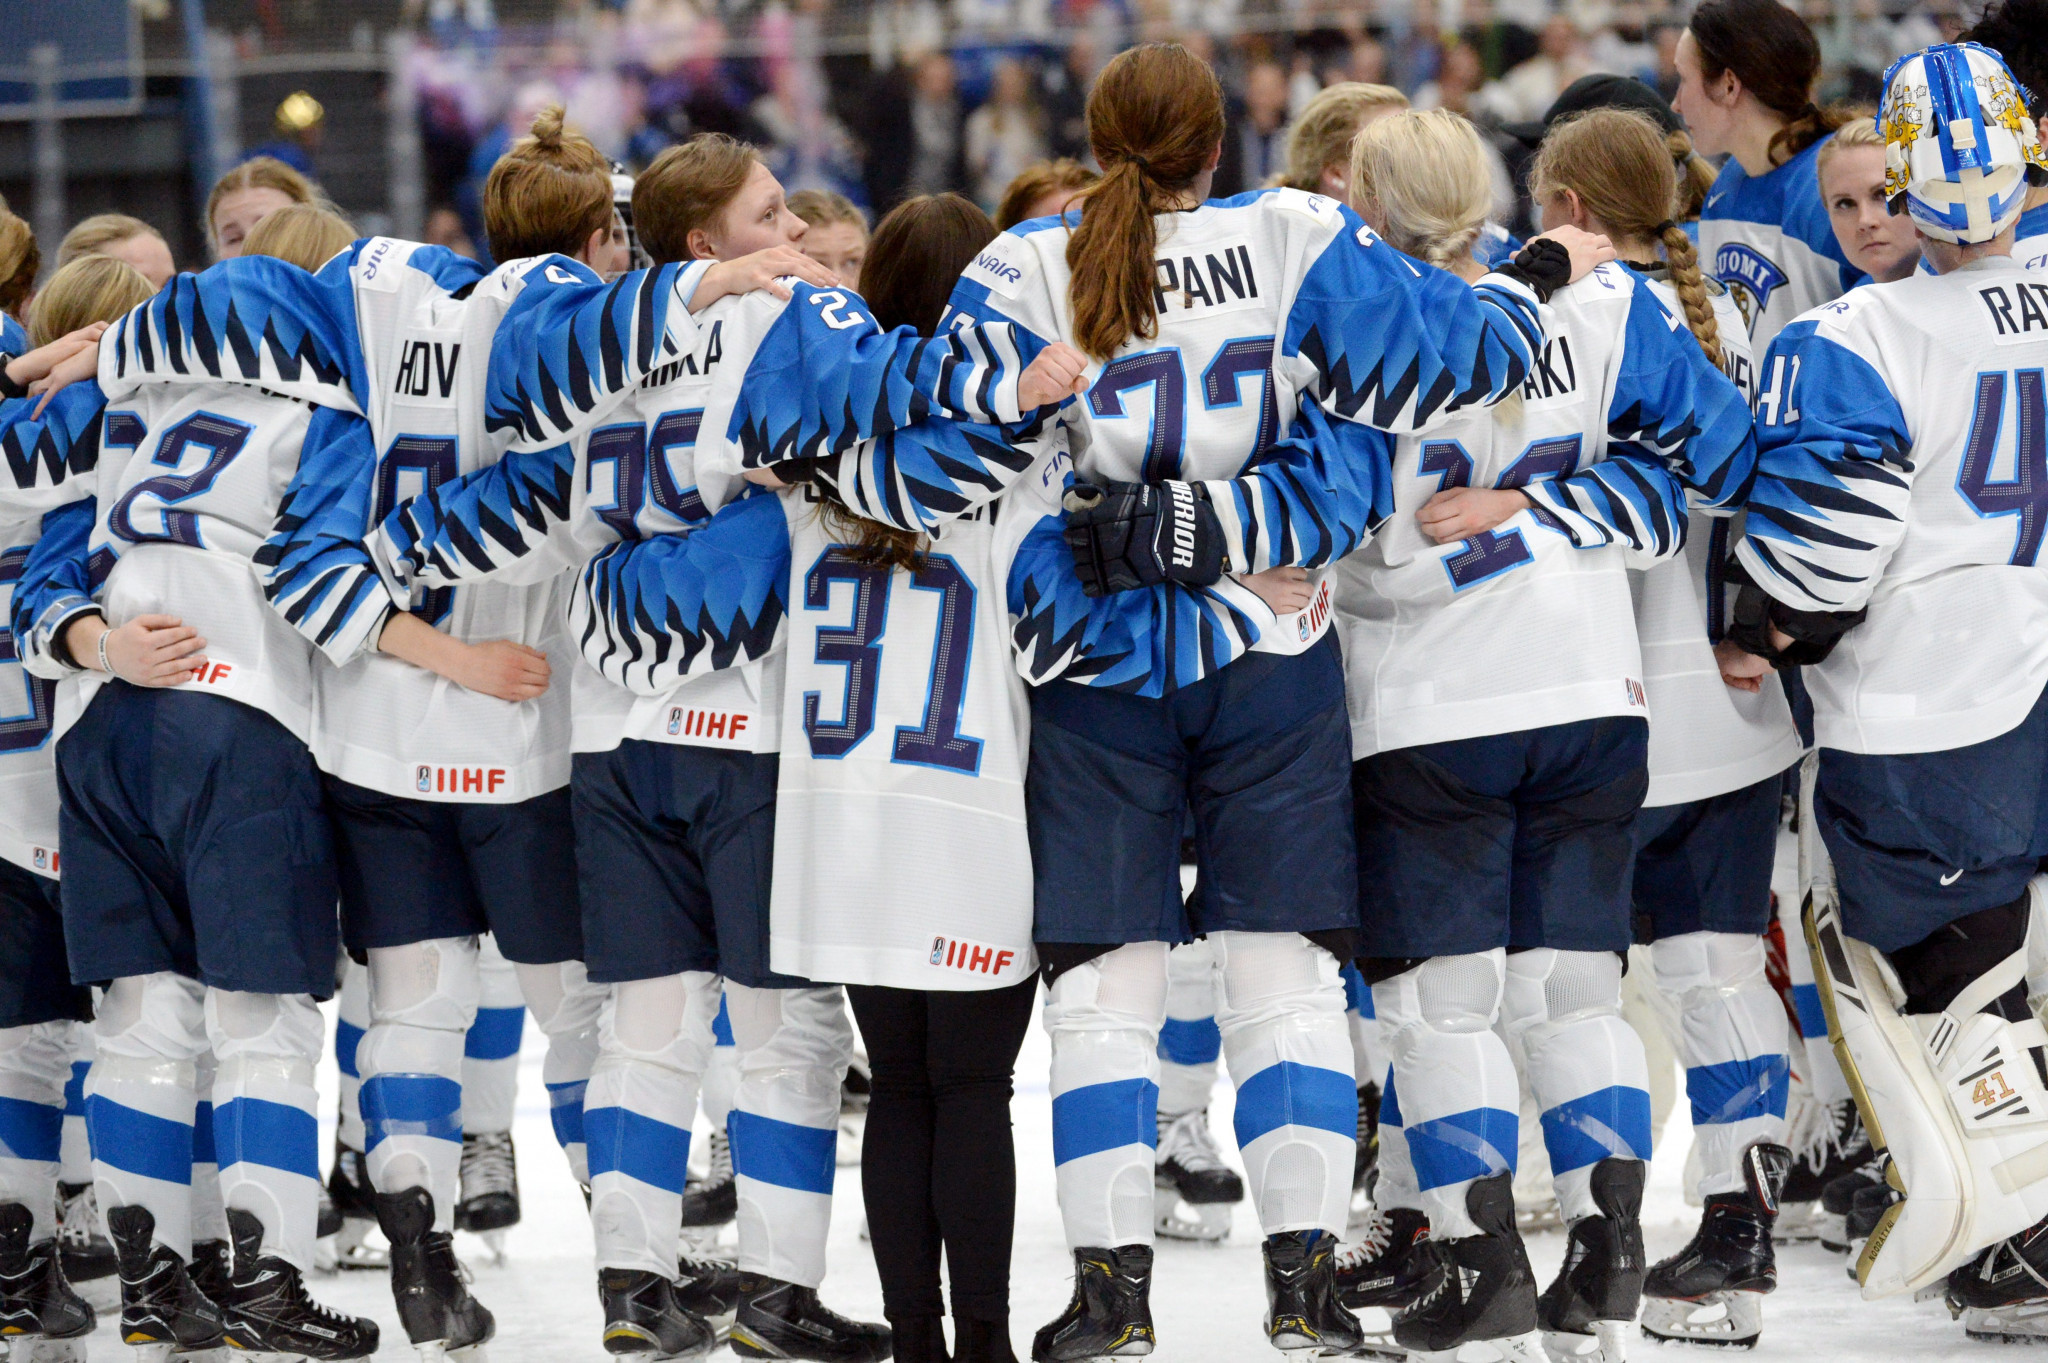 Finland's women ice hockey players form a huddle as they wait to hear whether what might have been a goal to win the world title would be allowed to stand - it was disallowed ©Getty Images